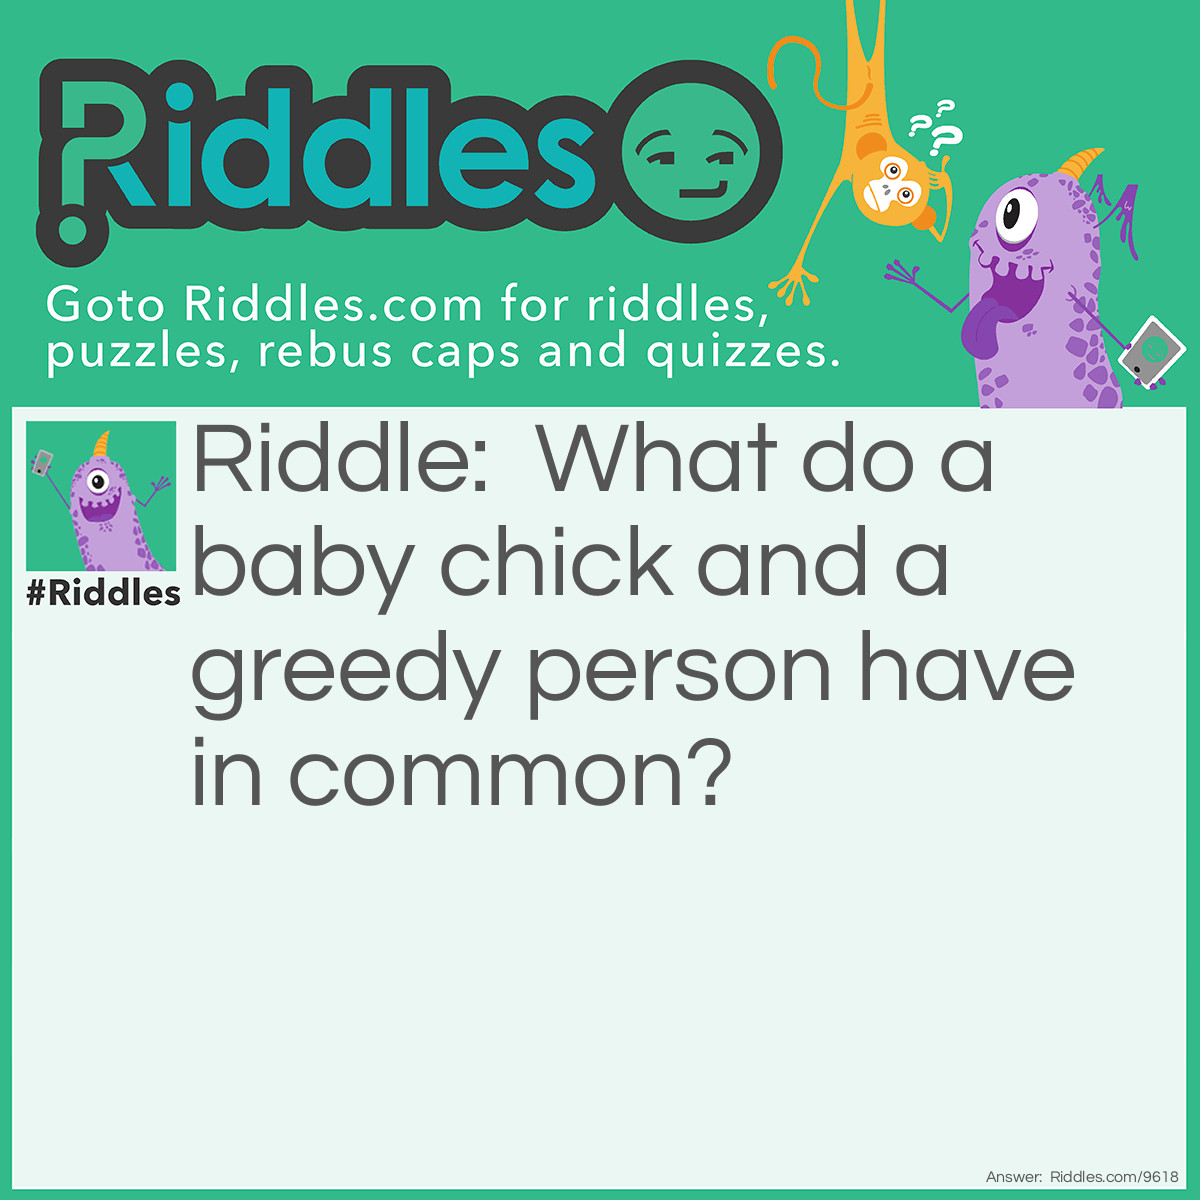 Riddle: What do a baby chick and a greedy person have in common? Answer: They both cheep cheap!